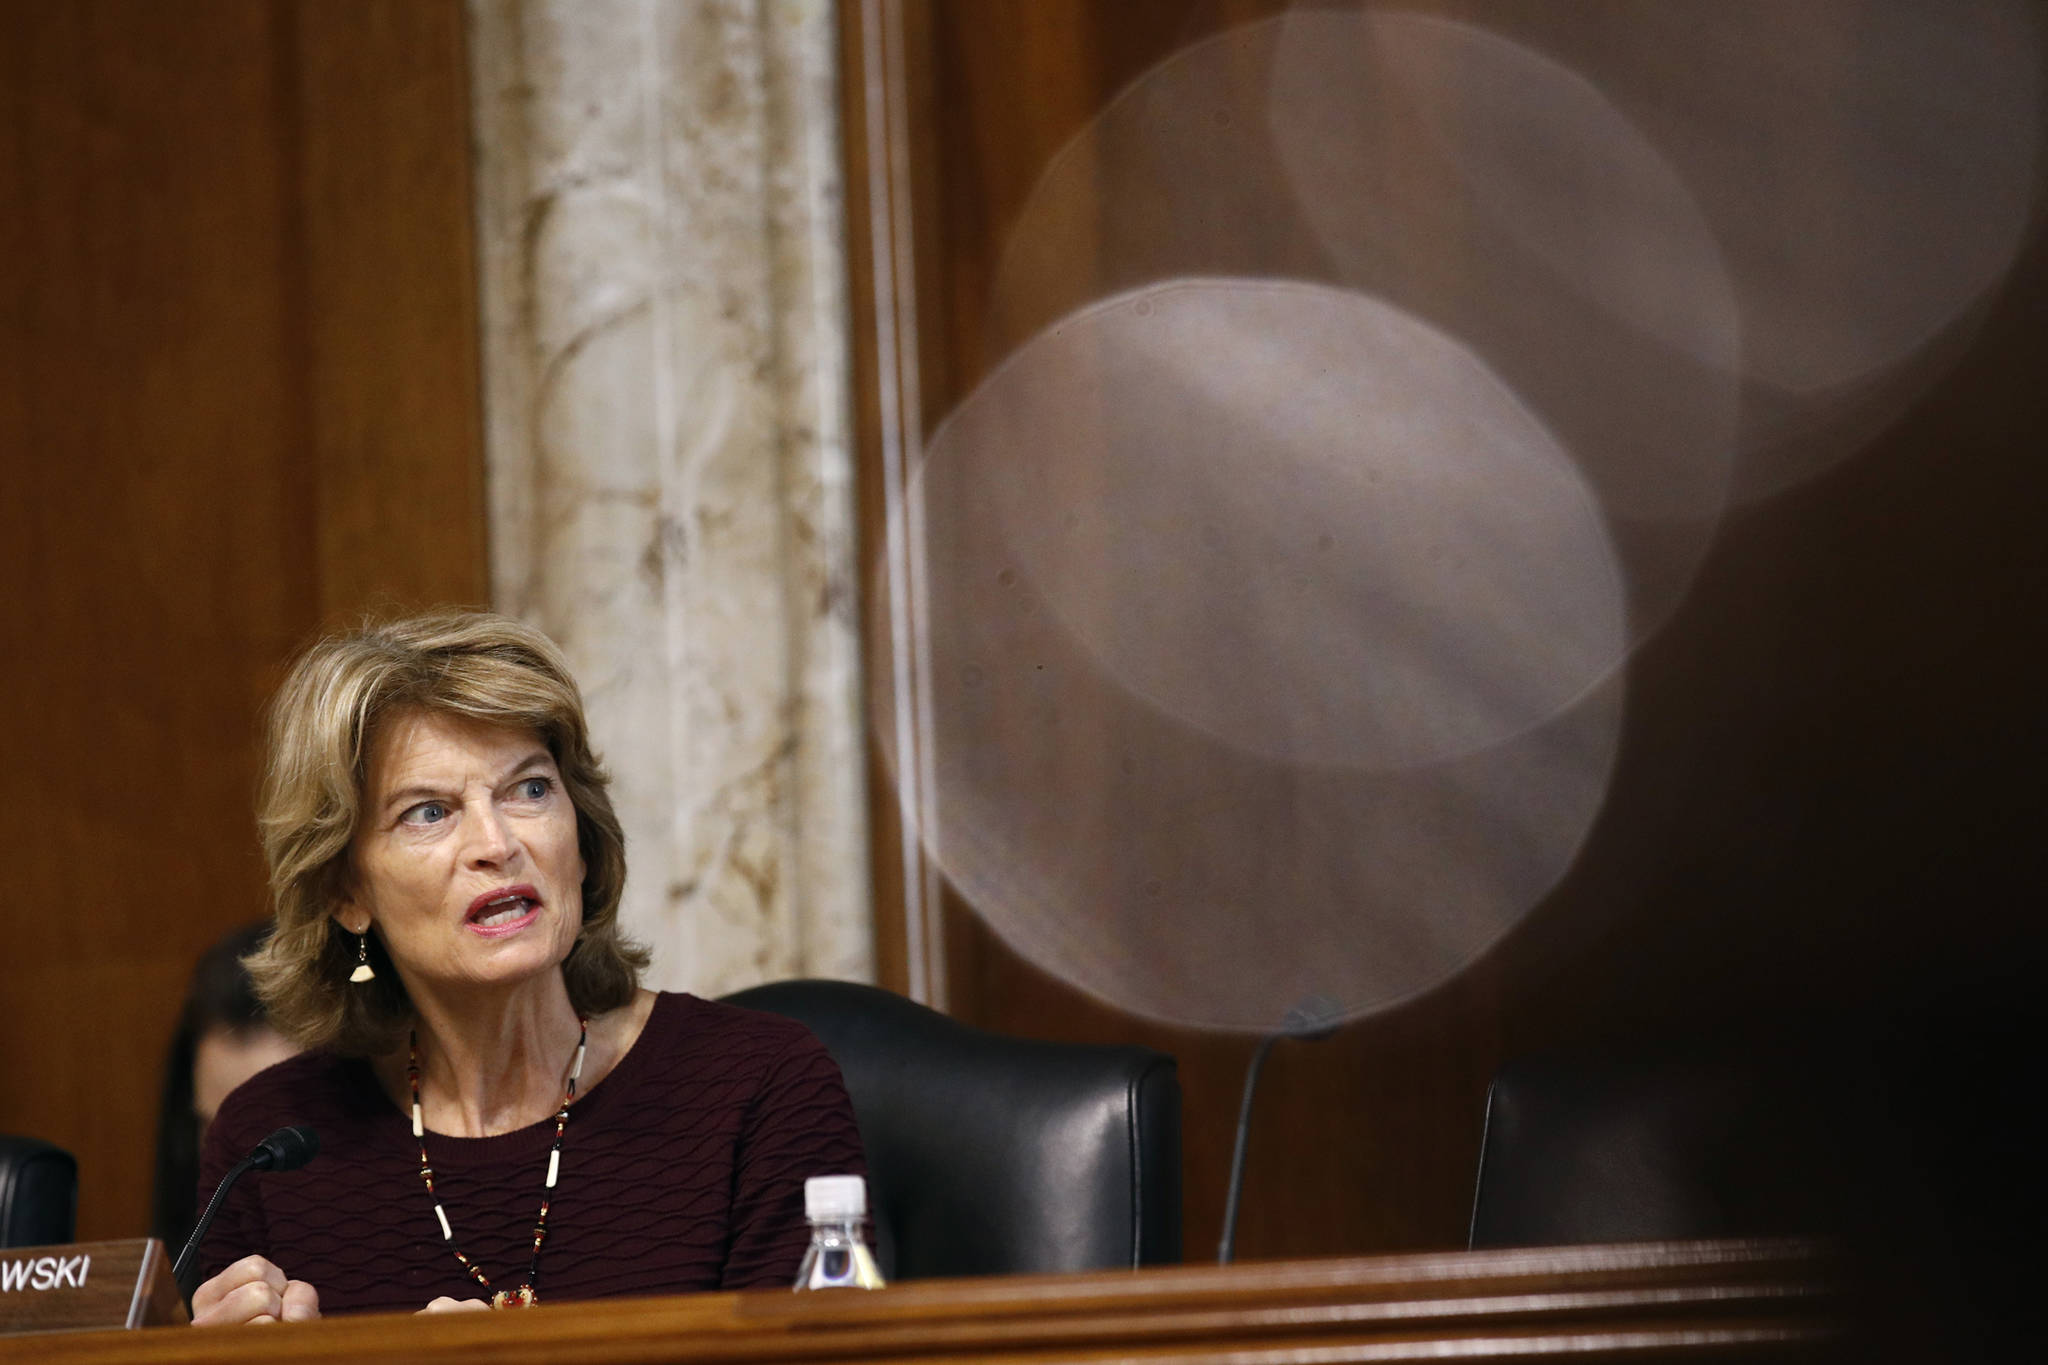 Sen. Lisa Murkowski, R-Alaska, chairwoman of the Senate Energy and Natural Resources Committee, speaks during a hearing with Energy Secretary Rick Perry on the president’s budget request for Fiscal Year 2020 on Tuesday, April 2, 2019, on Capitol Hill in Washington, D.C. (Patrick Semansky | Associated Press)